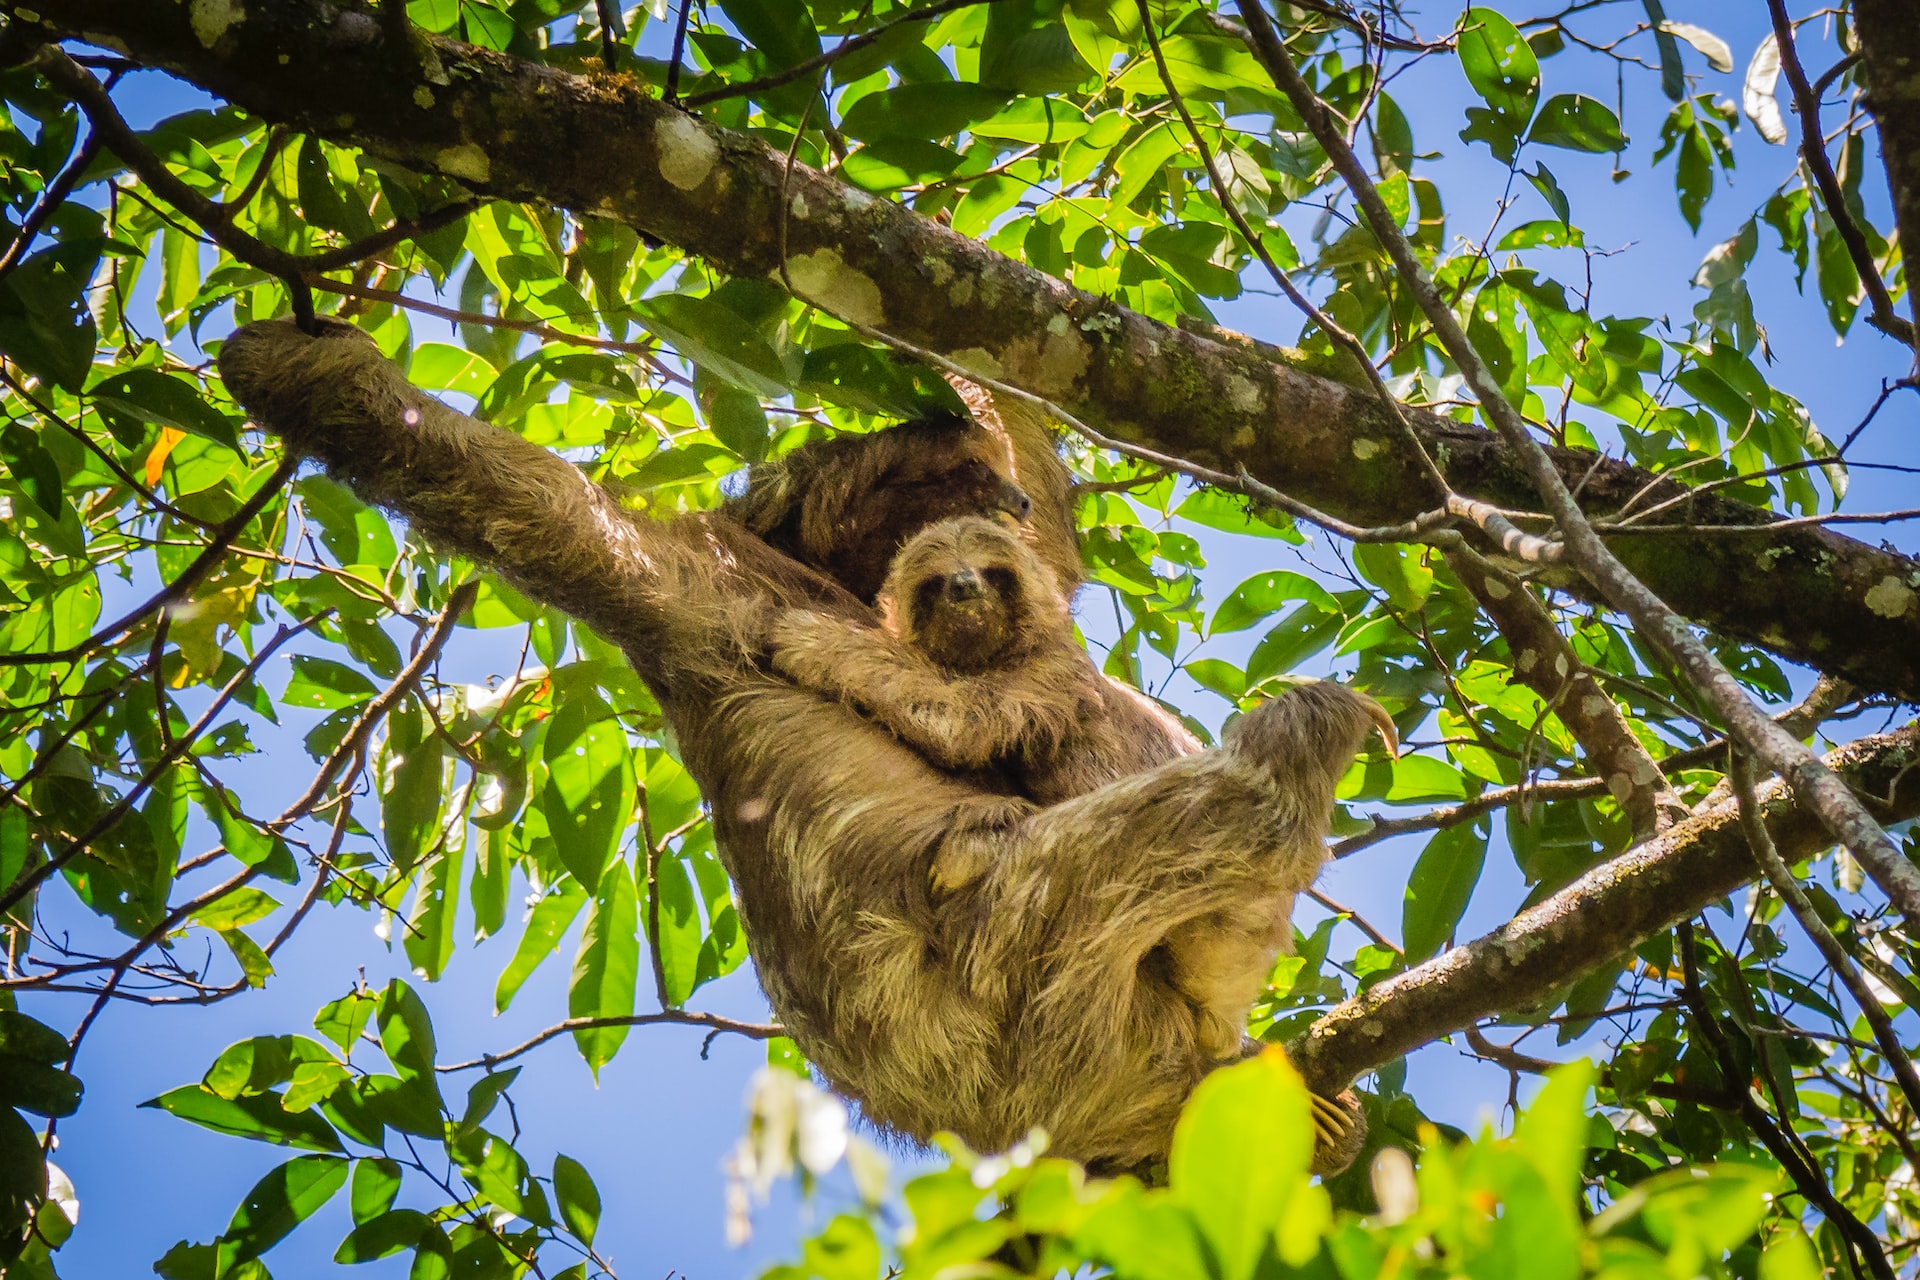 fun facts about sloths